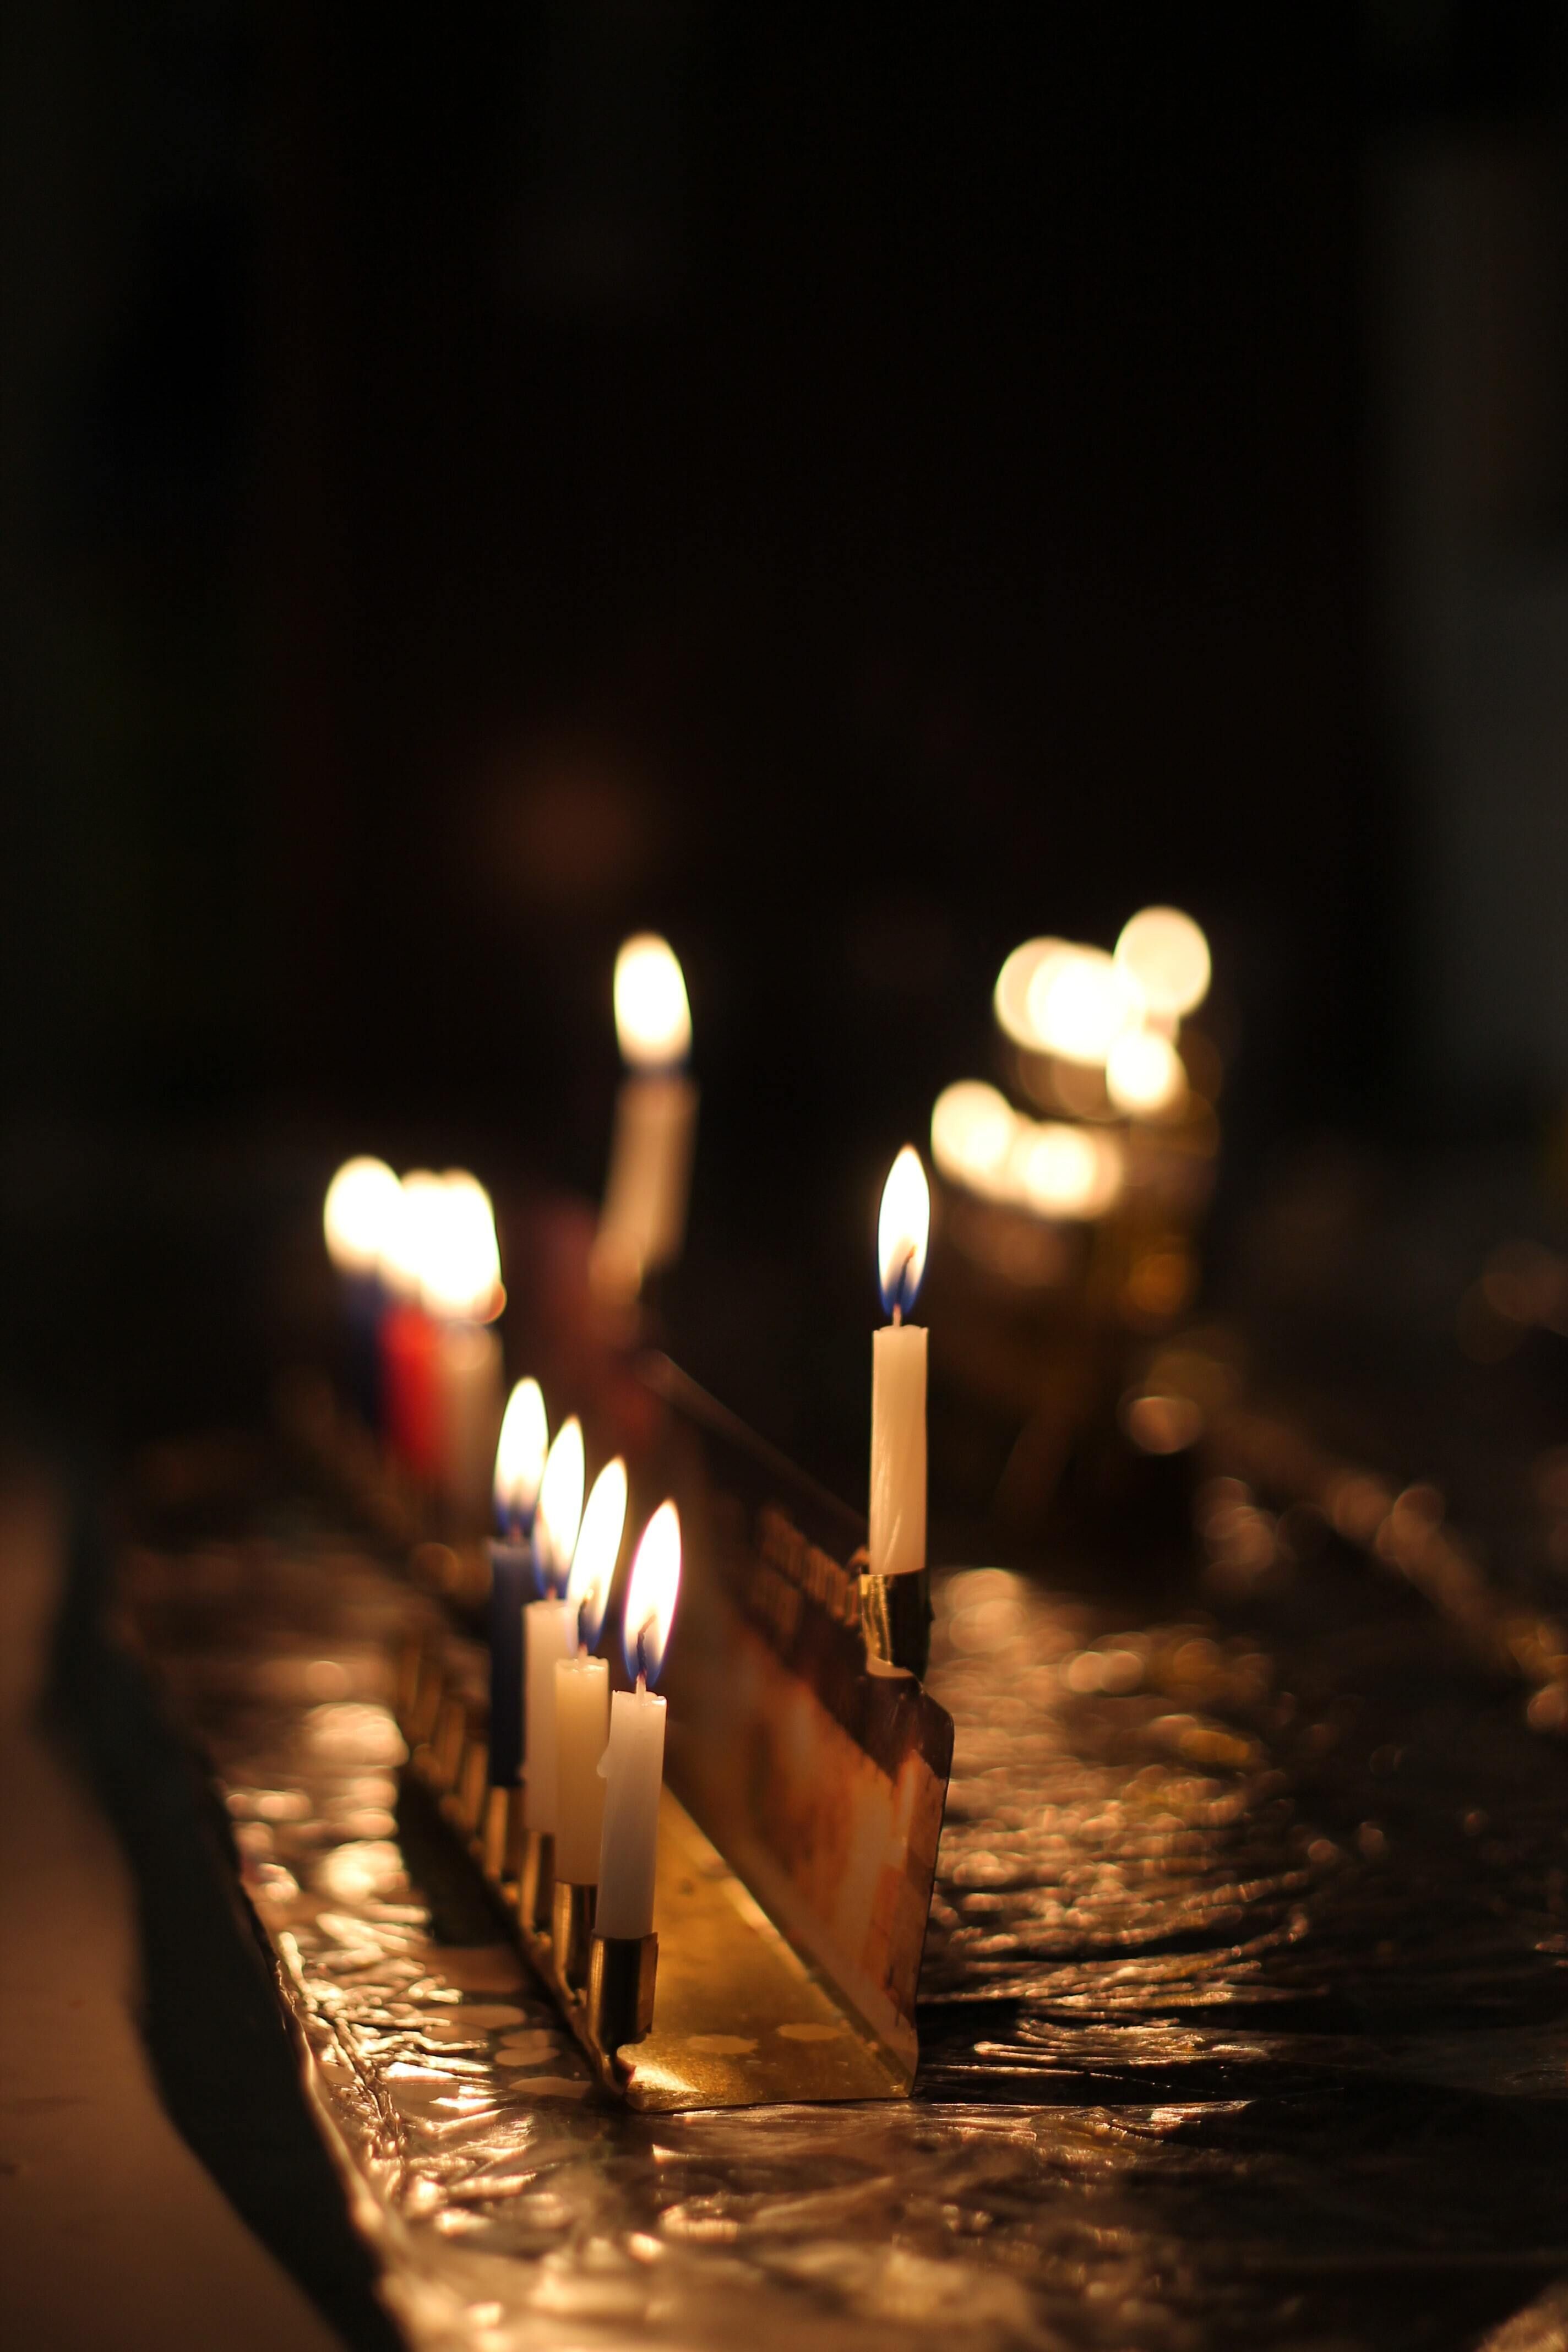 Chanukah happenings & other community events